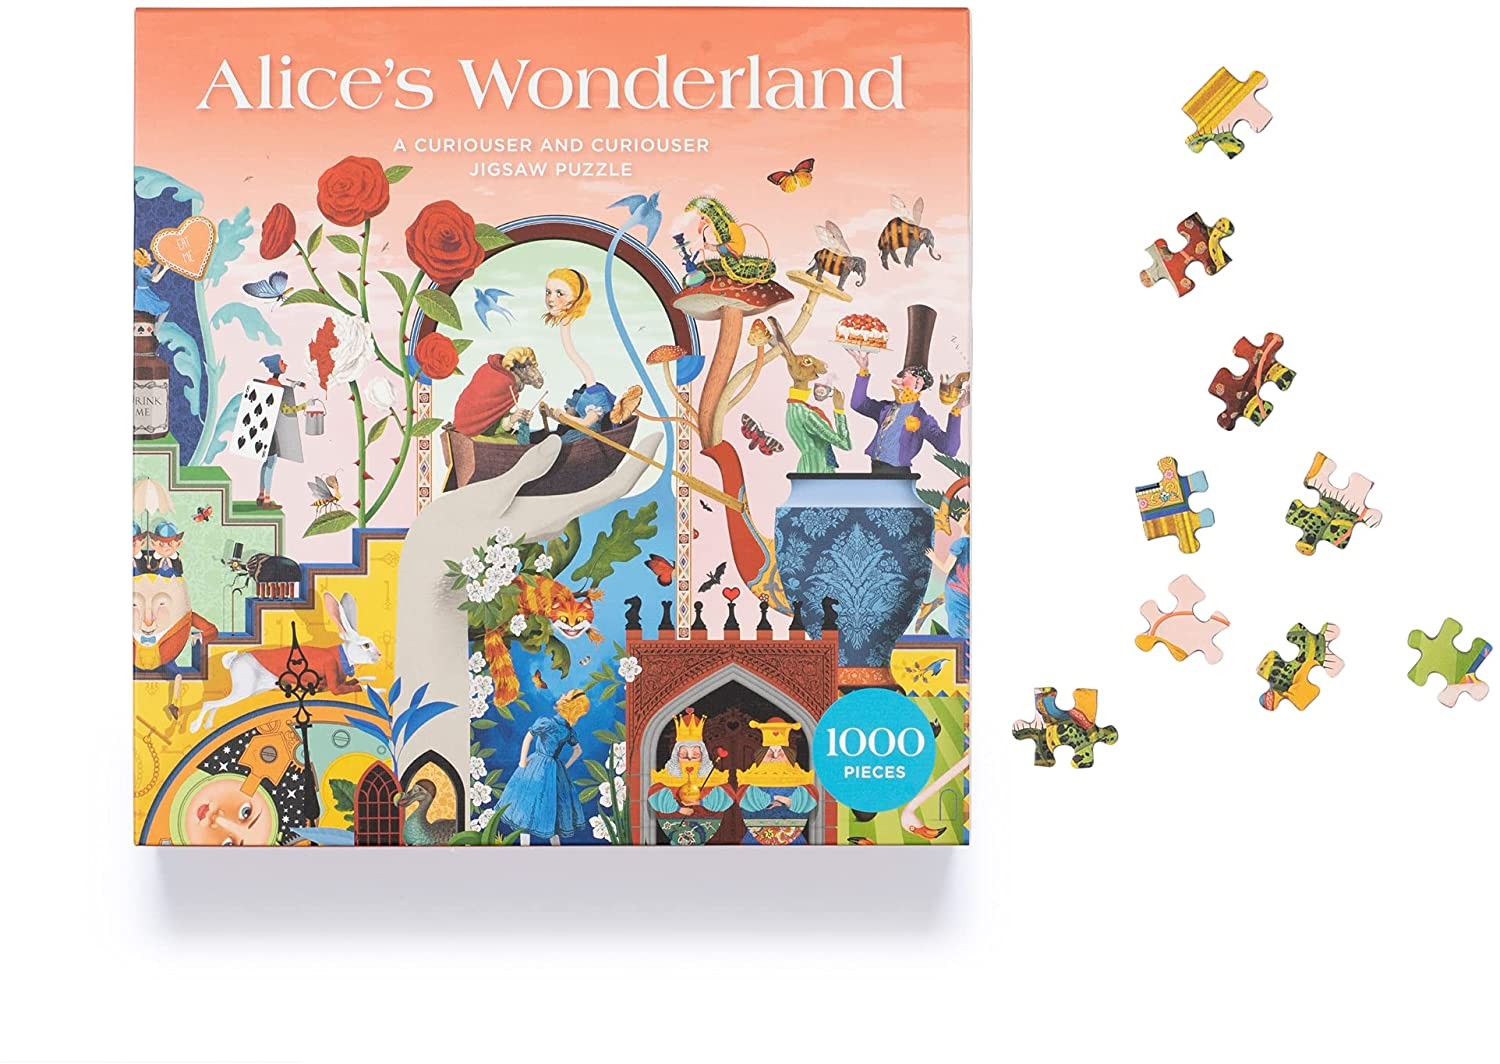 Alice's Wonderland 1000 Piece Jigsaw Puzzle and some pieces